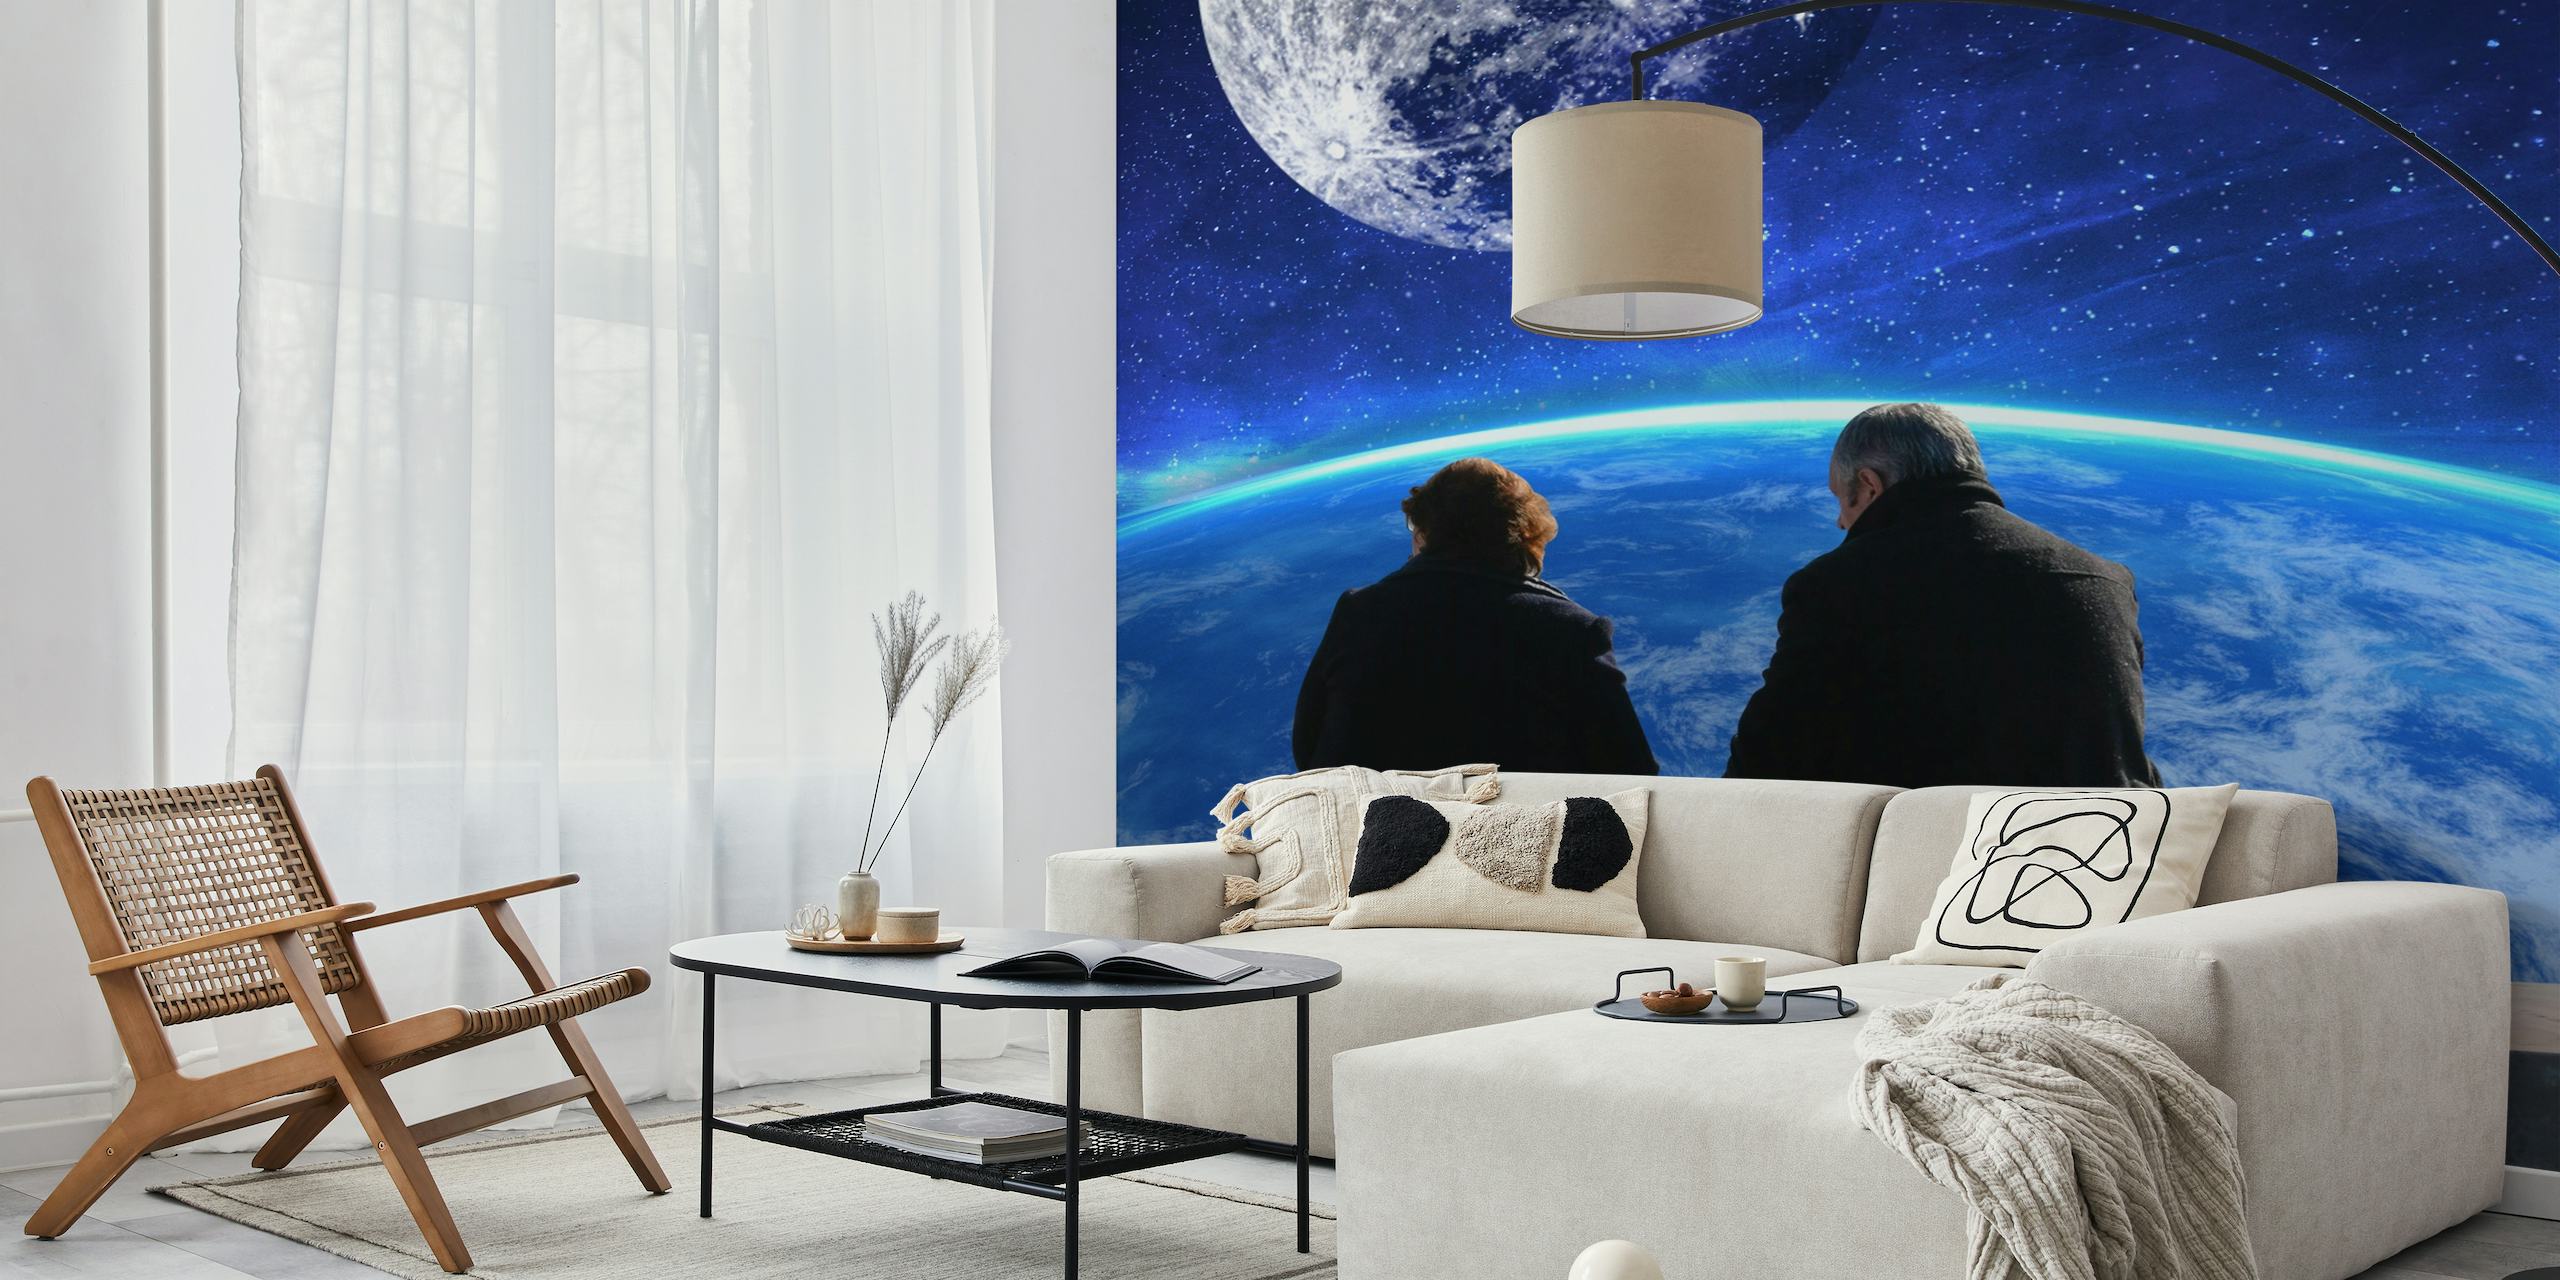 Couple silhouette with moon and Earth view space wall mural